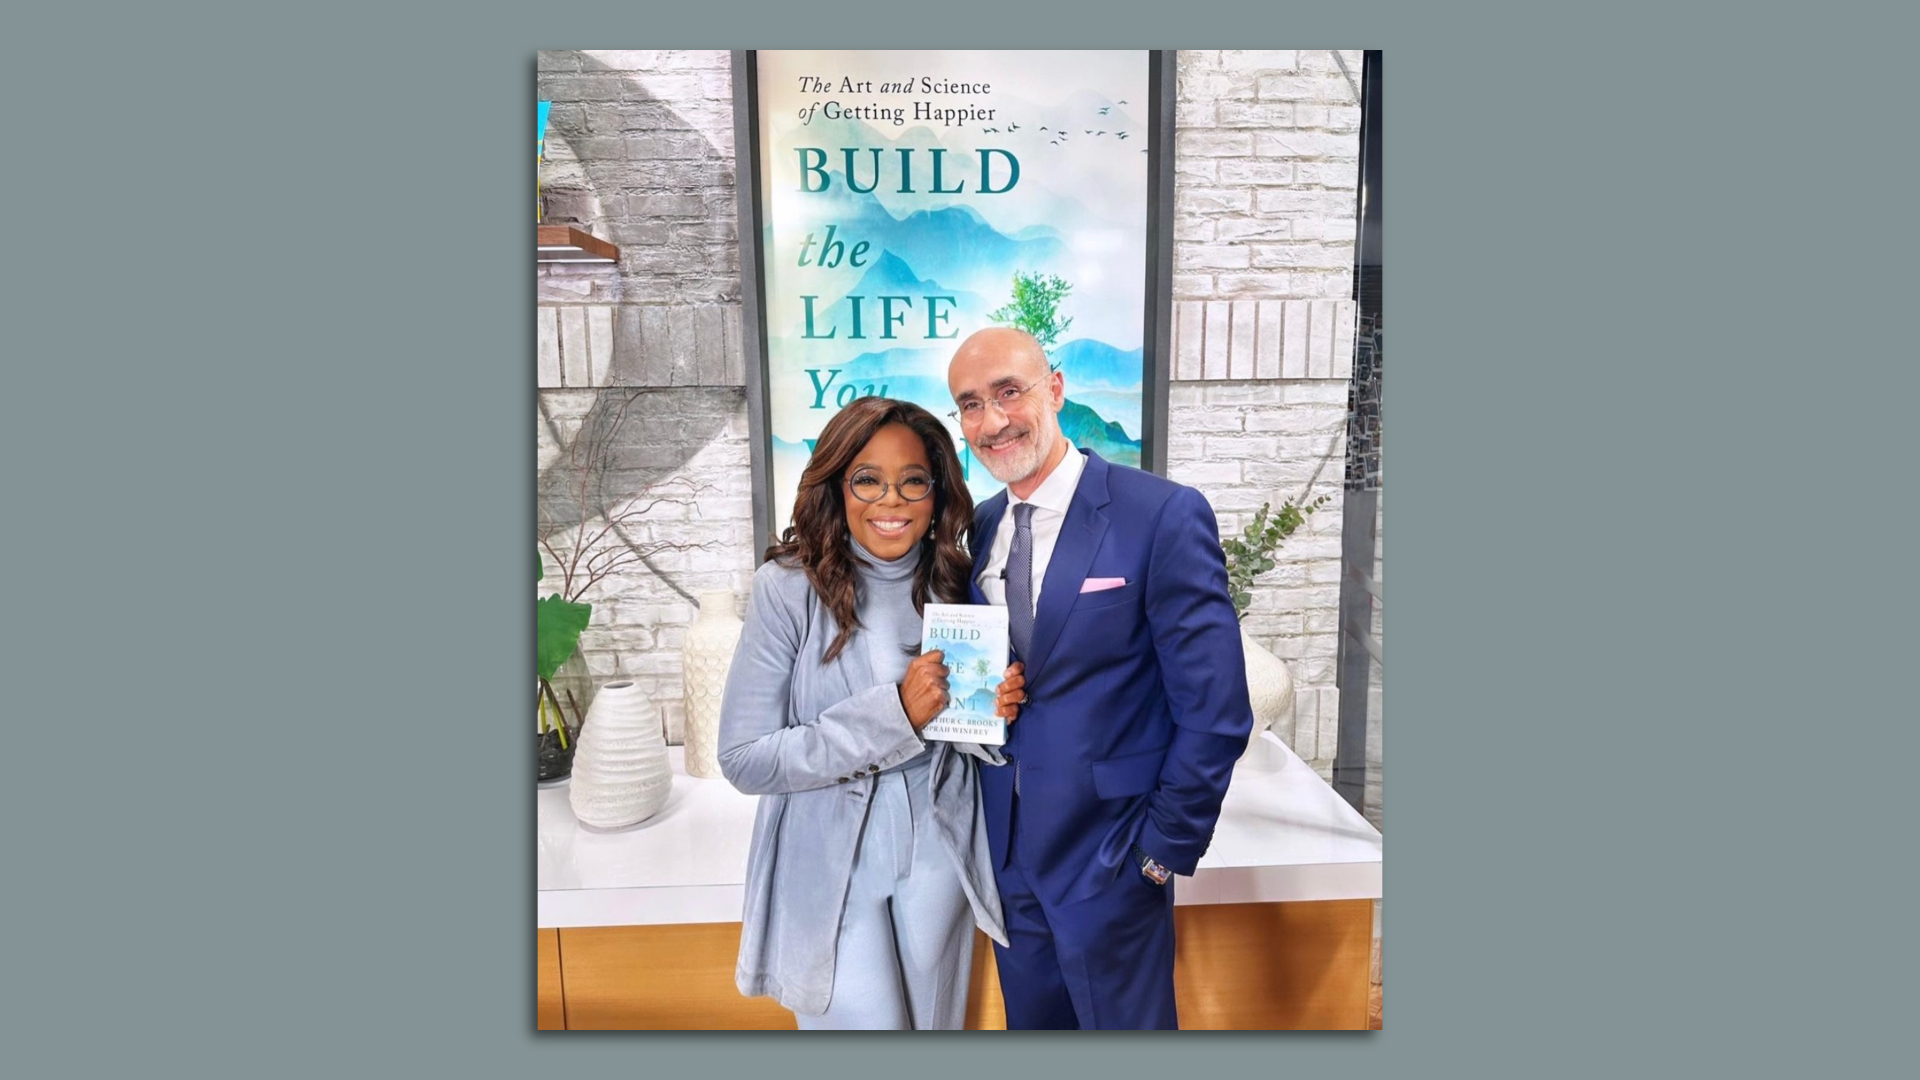 Oprah Winfrey with author Arthur Brooks with their  bestseller, "Build the Life You Want: The Art and Science of Getting Happier." 